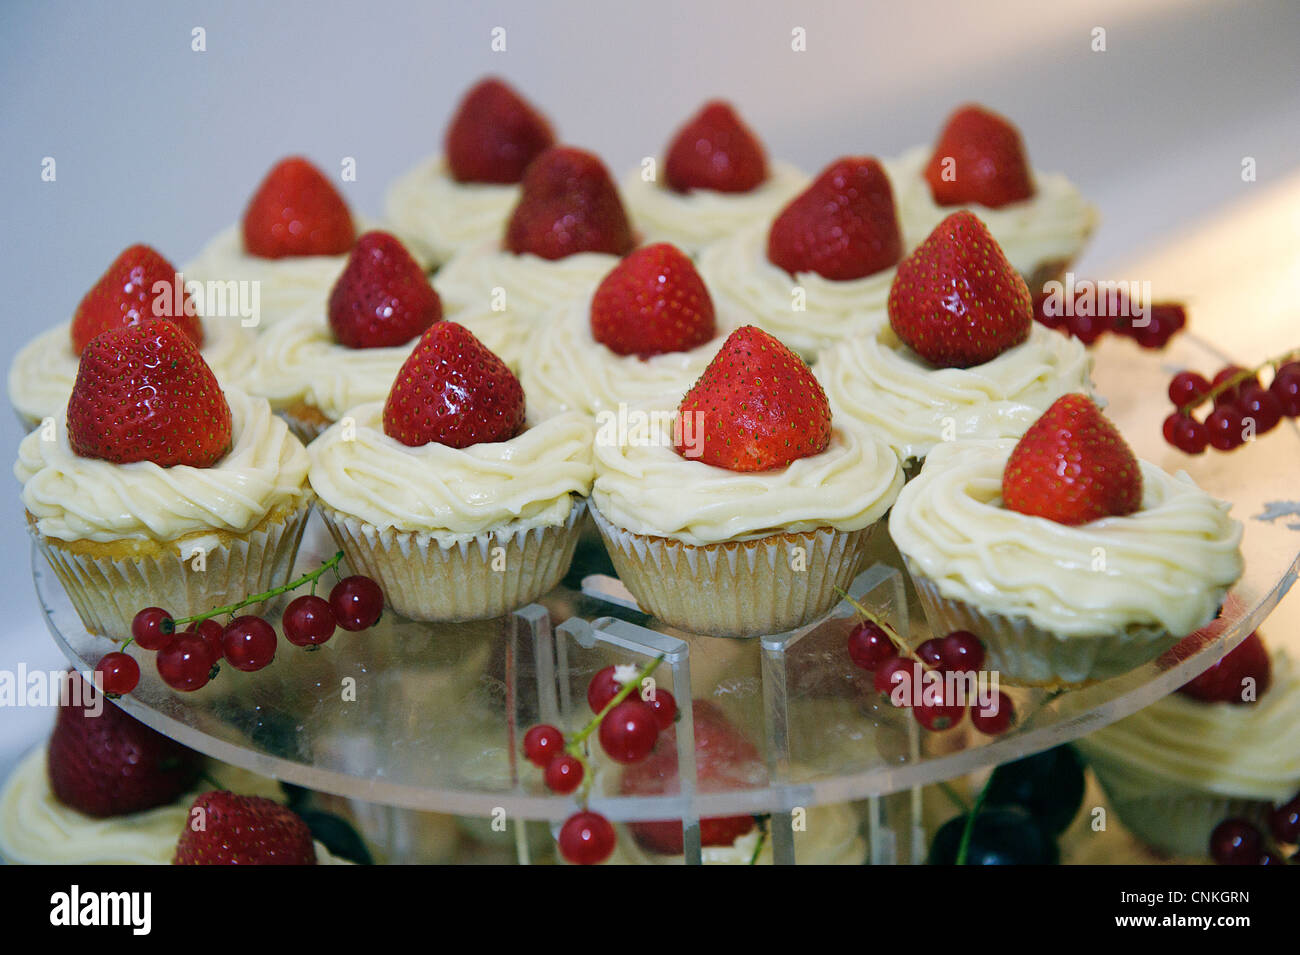 cake stand with fresh strawberry cupcakes and cream or butter icing with redcurrants Stock Photo